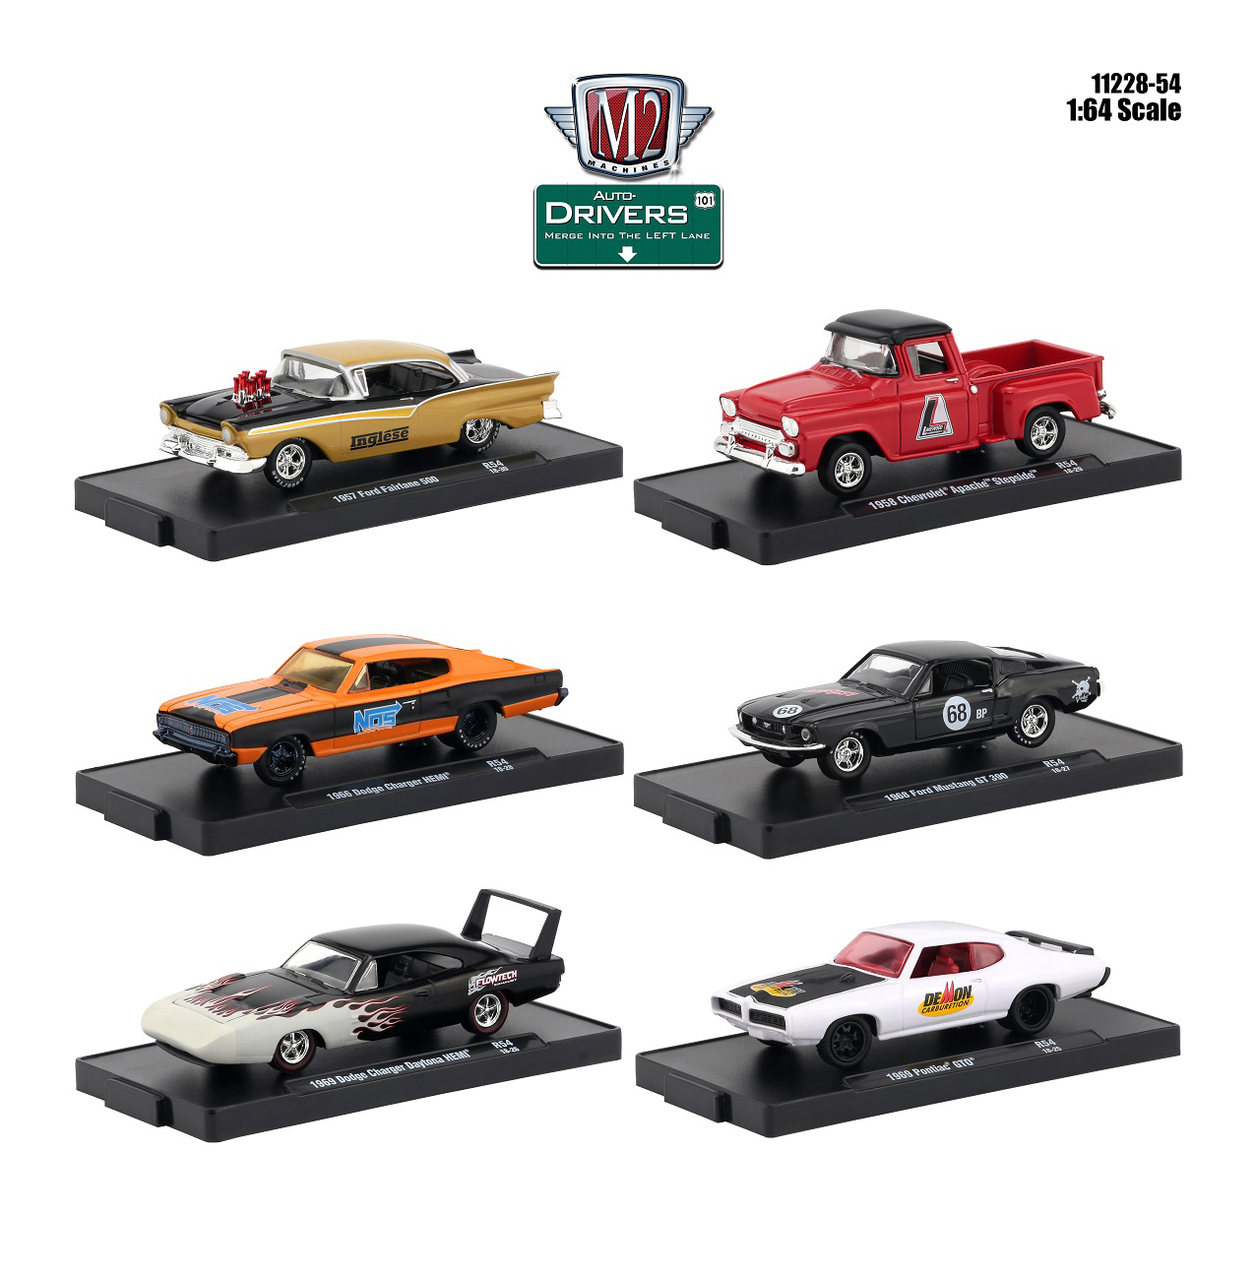 Drivers 6 Cars Set Release 54 In Blister Packs 1/64 Diecast Model Cars By M2 Machines